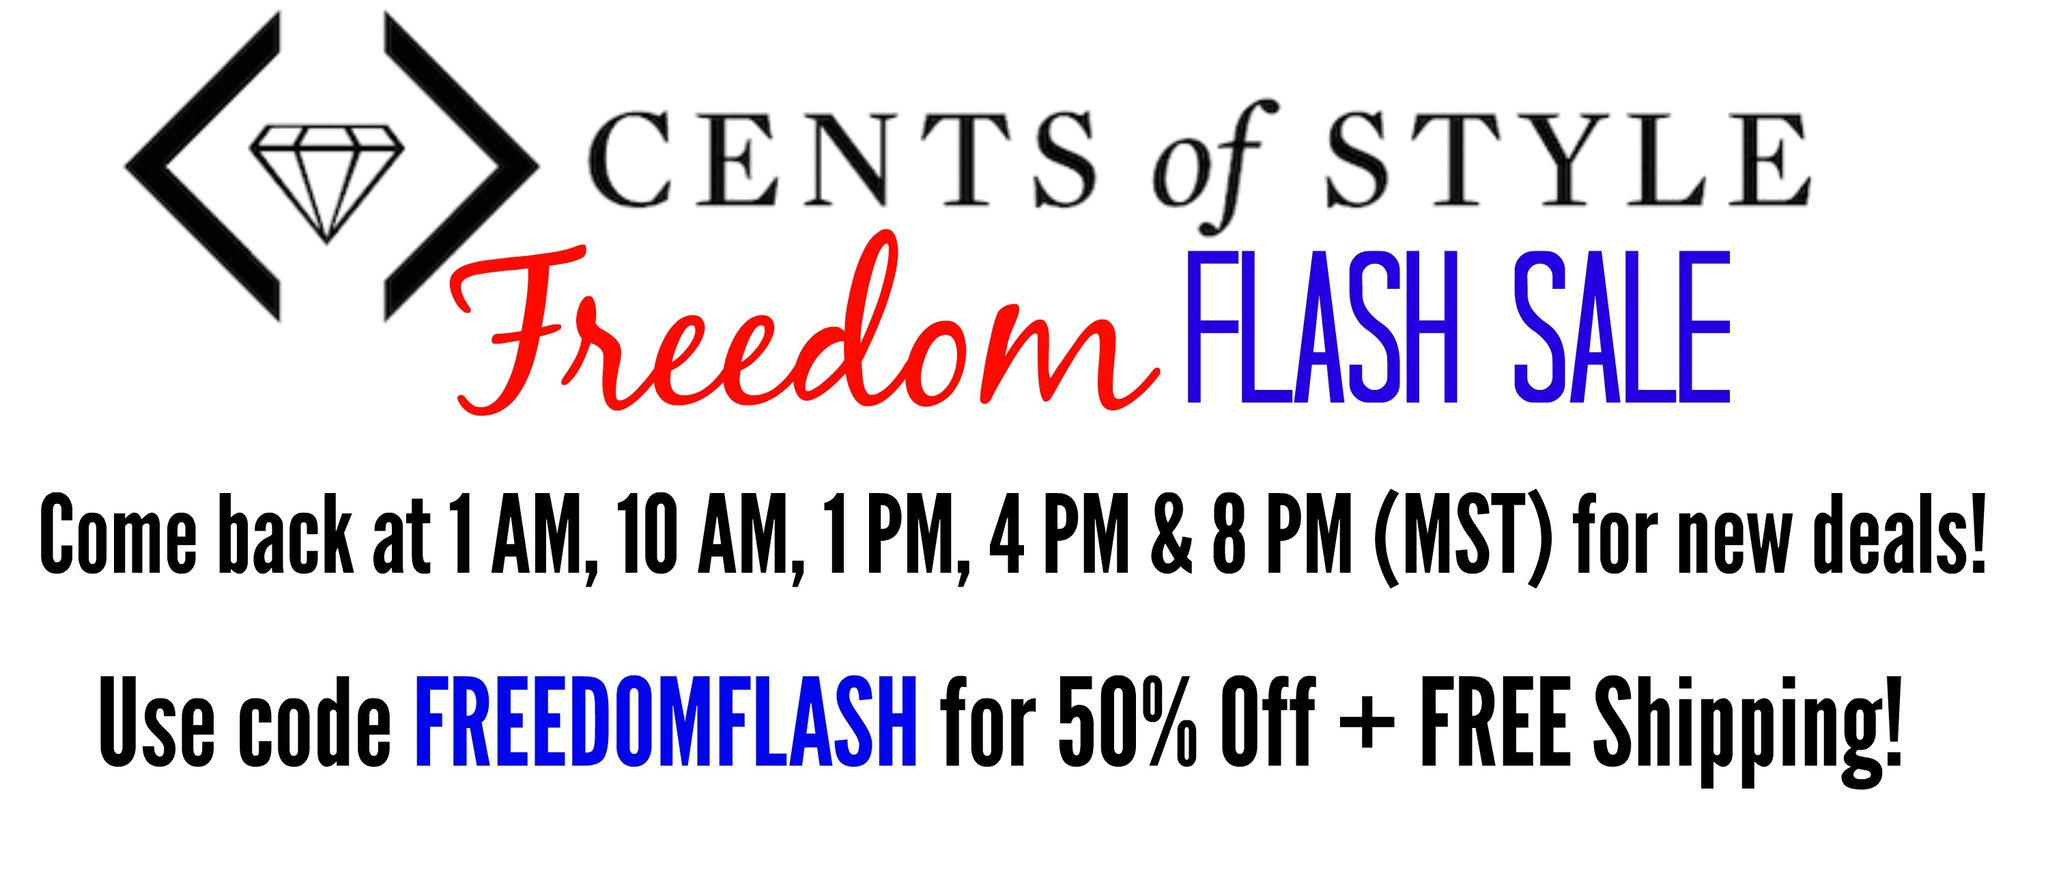 Freedom Flash Sale! New 50% OFF Deals ALL Day at Cents of Style!